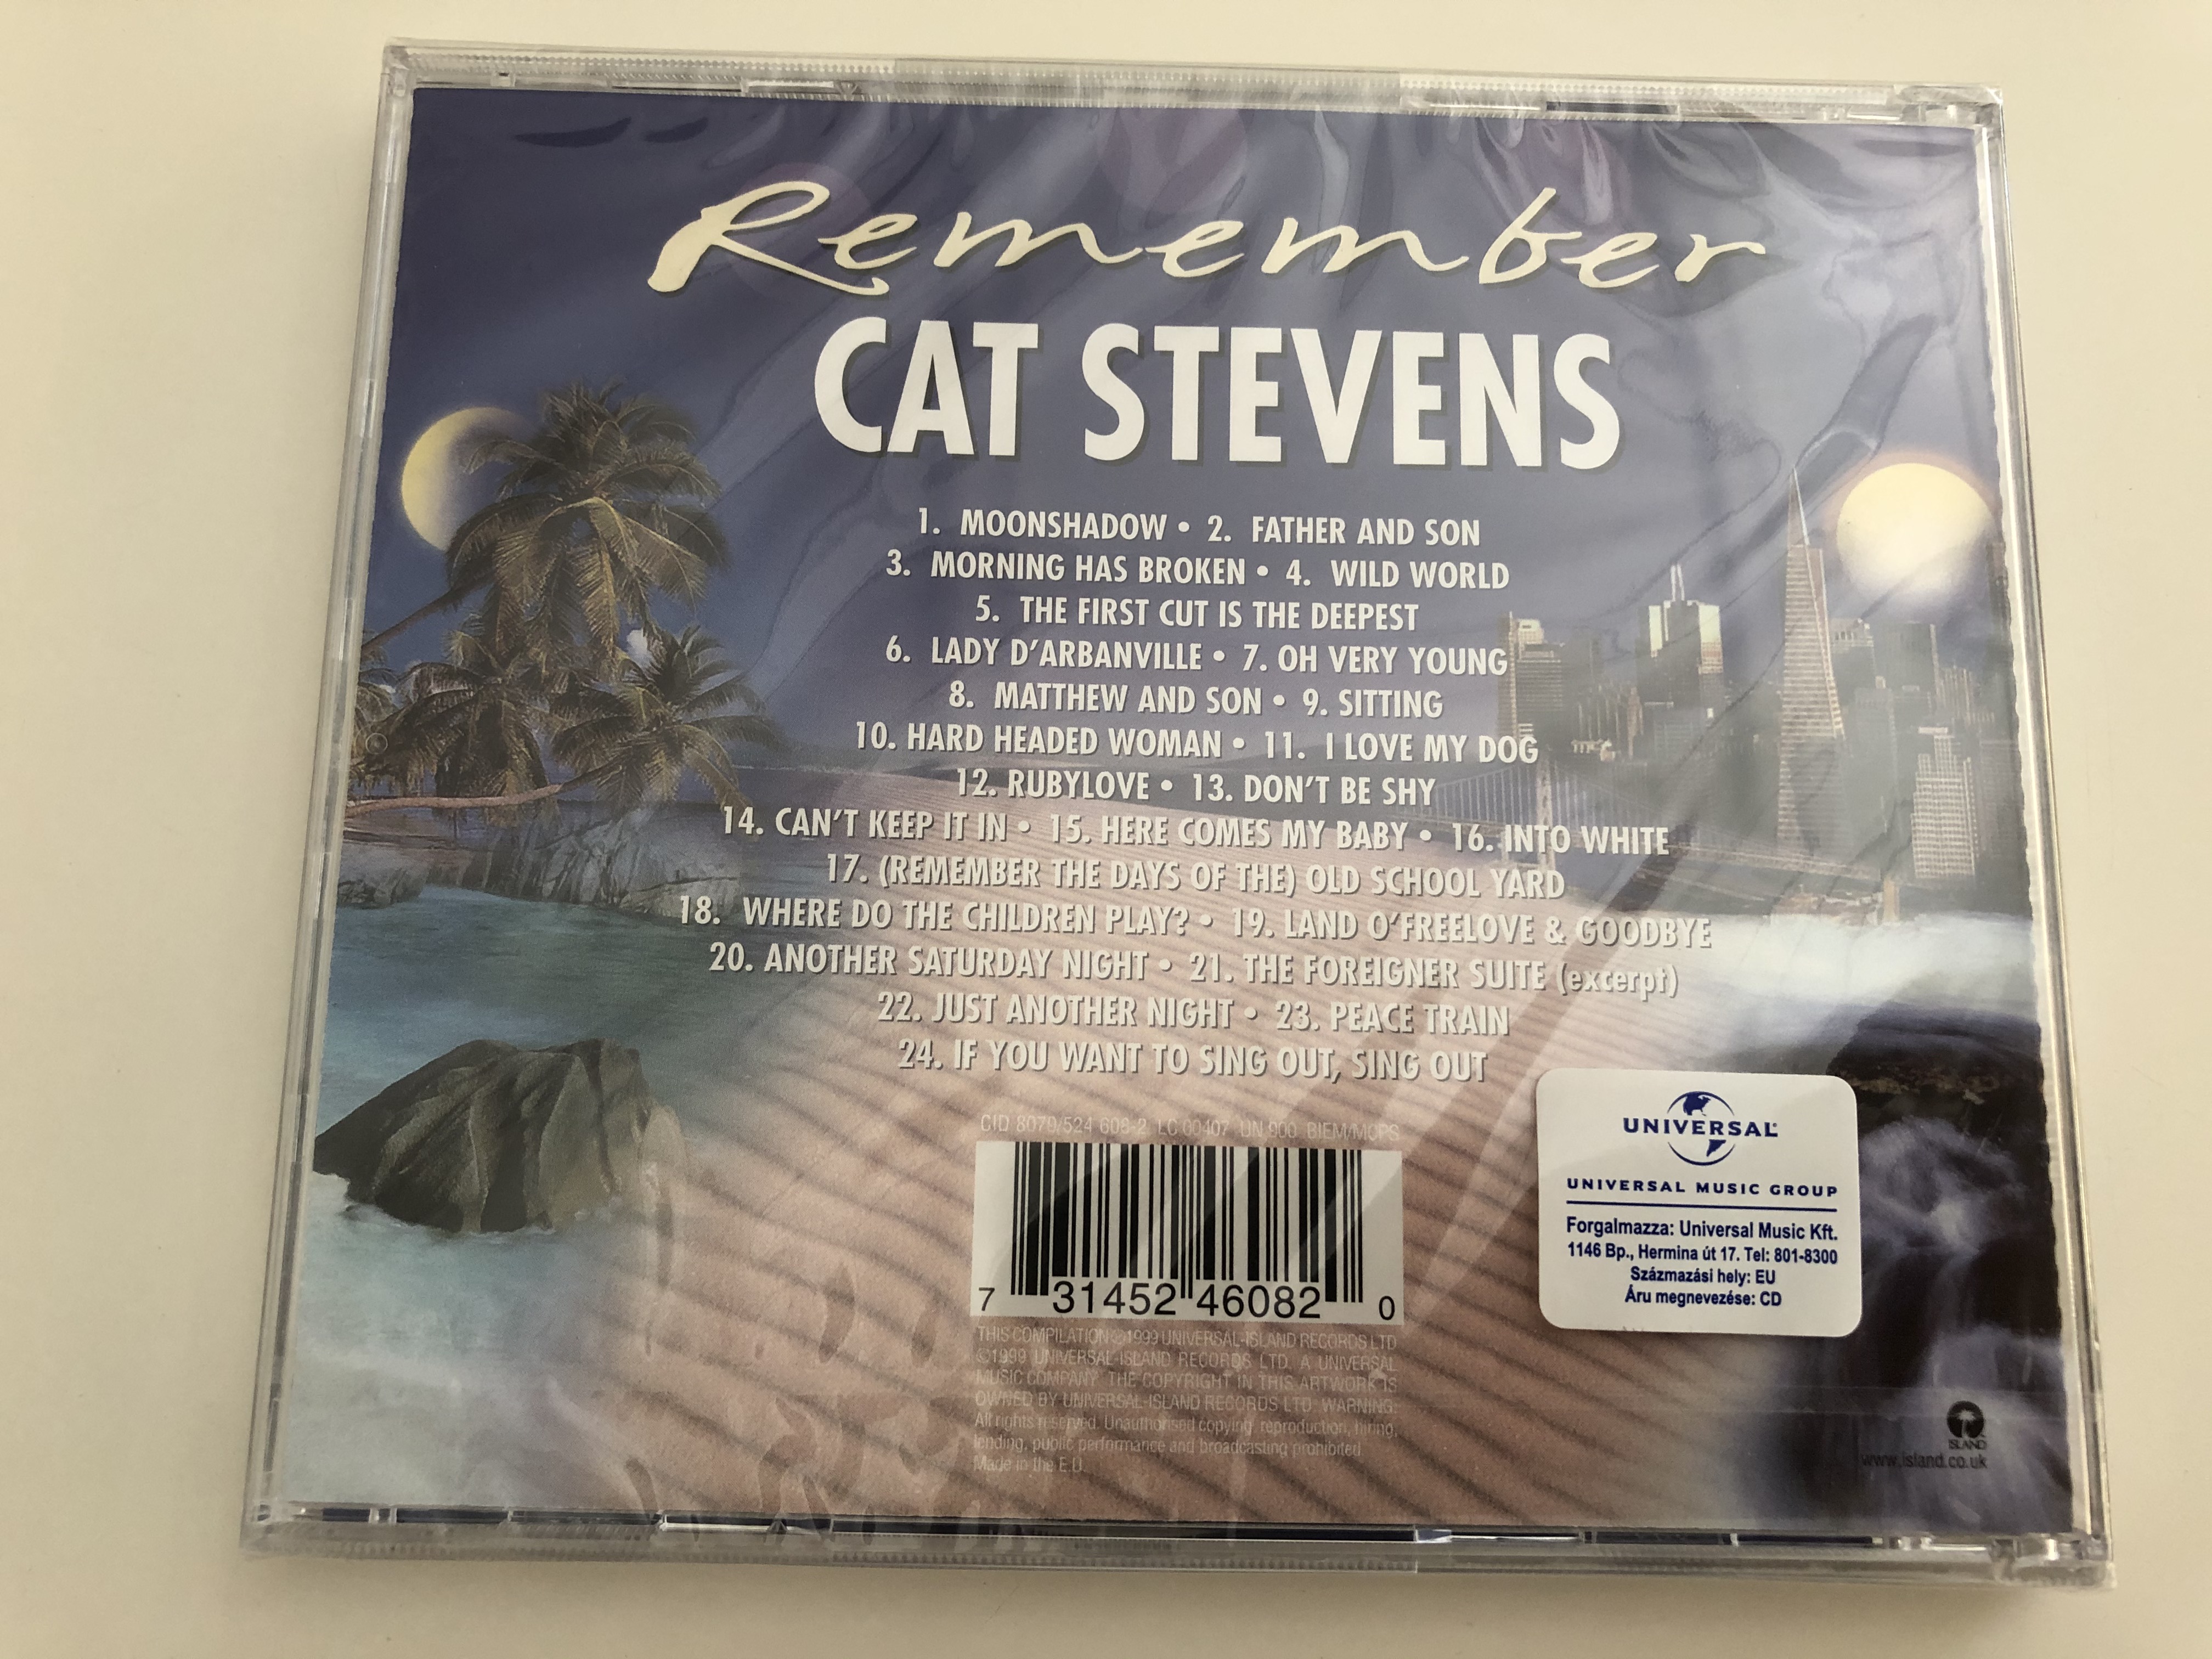 remember-cat-stevens-the-ultimate-collection-24-tracks-including-wild-world-father-and-son-moonshadow-matthew-son-the-first-cut-is-the-deepest-morning-has-broken-old-school-yard-3-.jpg